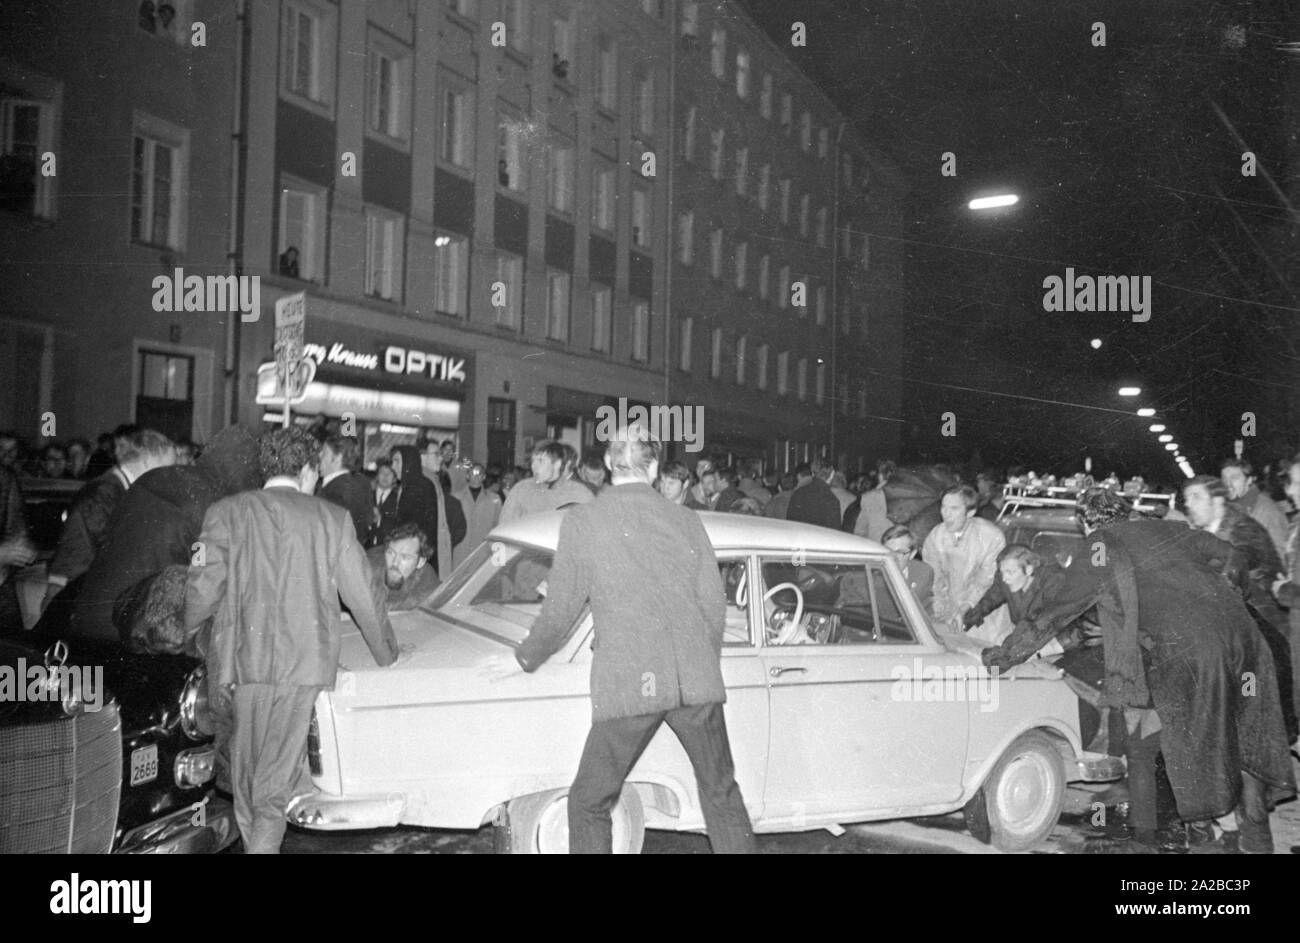 Following the assassination attempt on Rudi Dutschke, actions took place against the Springer publishing house throughout Germany on the Easter weekend 1968. In Munich, demonstrators try to stop the delivery of the Bild-Zeitung through the barricade of the Munich bookshop on Schellingstrasse (either 12.04 or 15.04.). Stock Photo